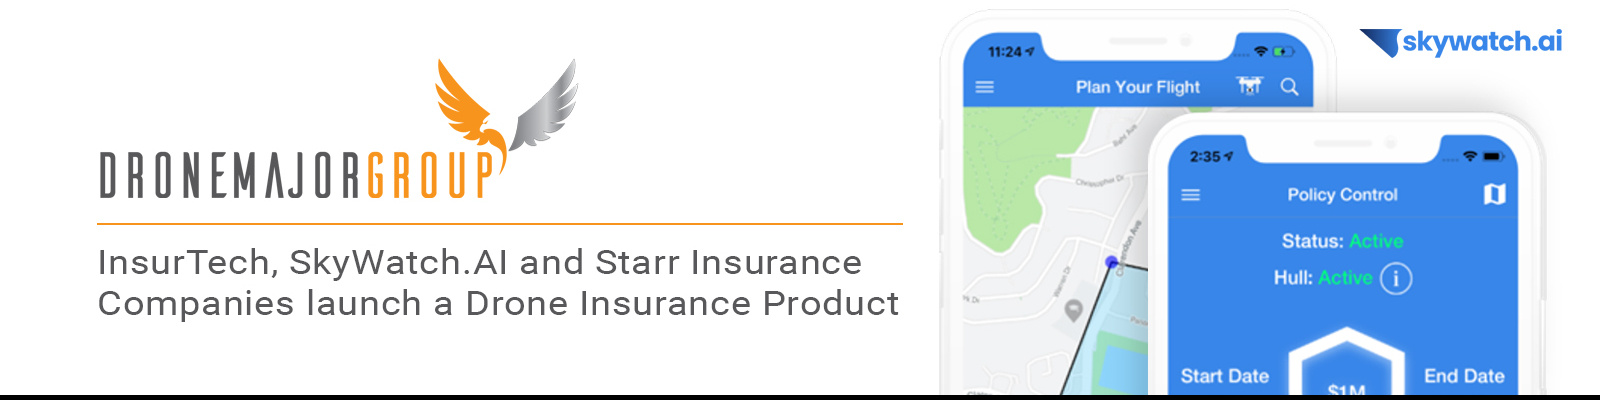 SkyWatch.AI and Starr offer on-demand hourly, monthly and annual drone insurance solutions based on a proprietary safety platform